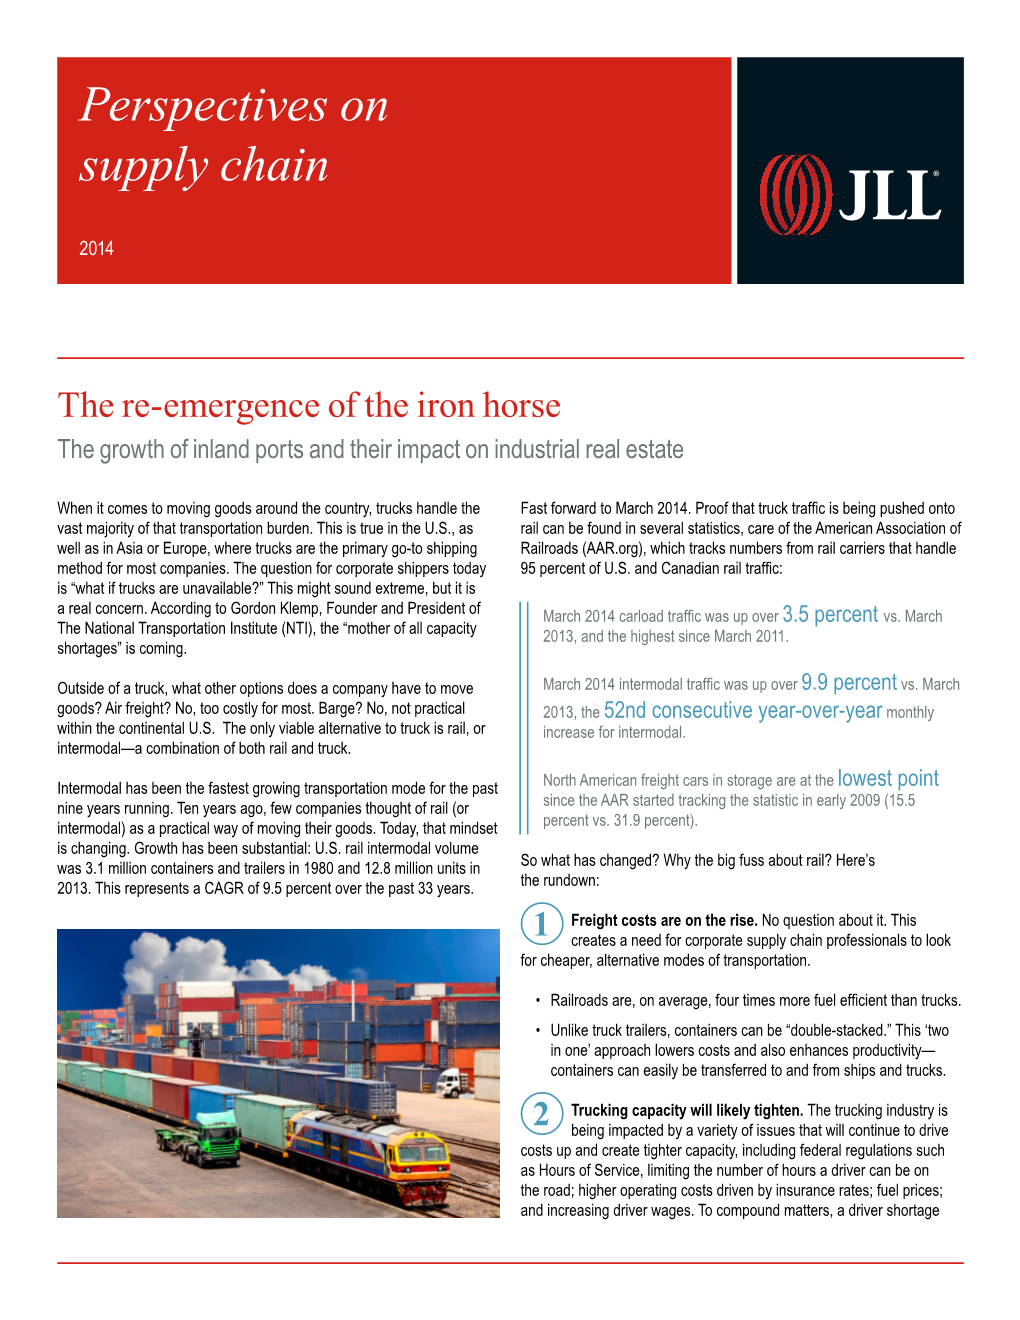 Perspectives on Supply Chain